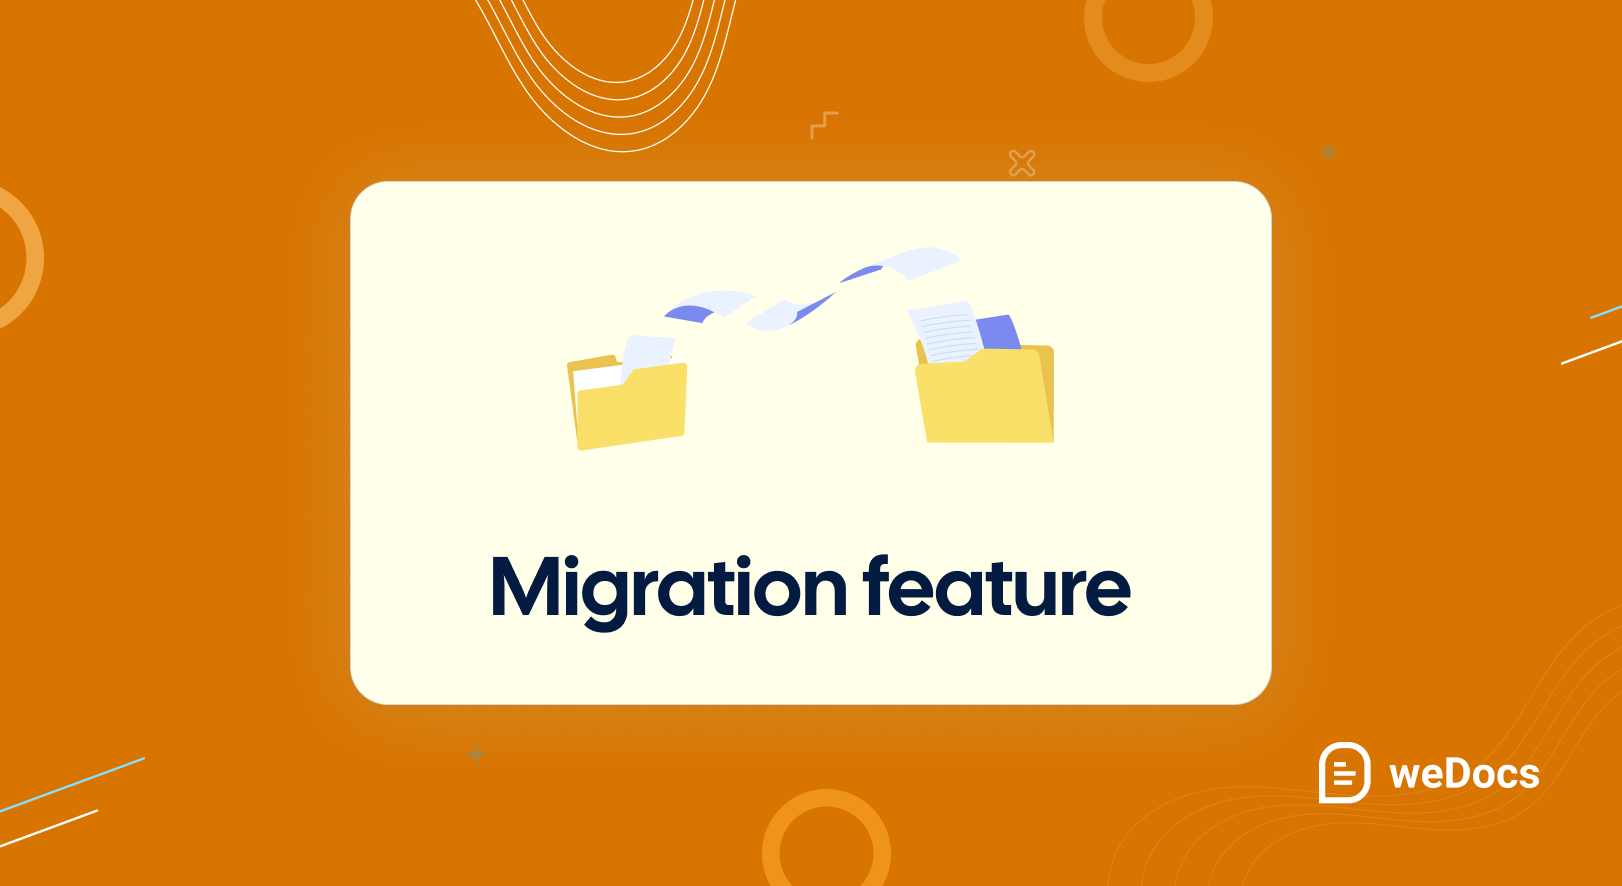 Easy migration feature to migrate content from BetterDocs to weDocs